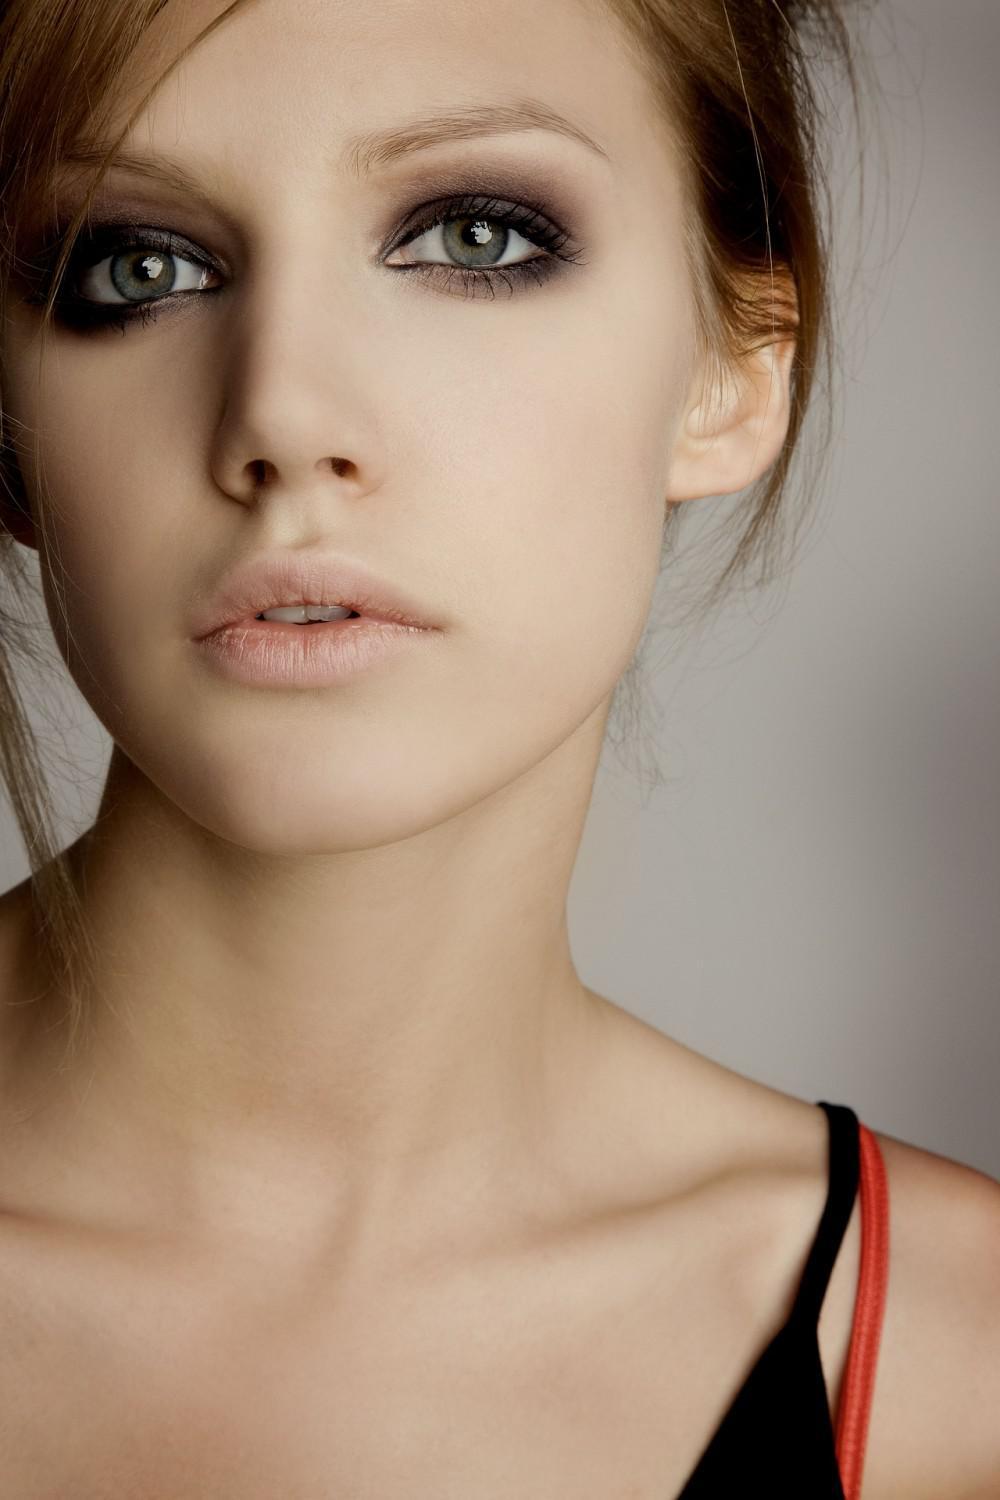 young woman with smooth skin and dark, dramatic eye makeup